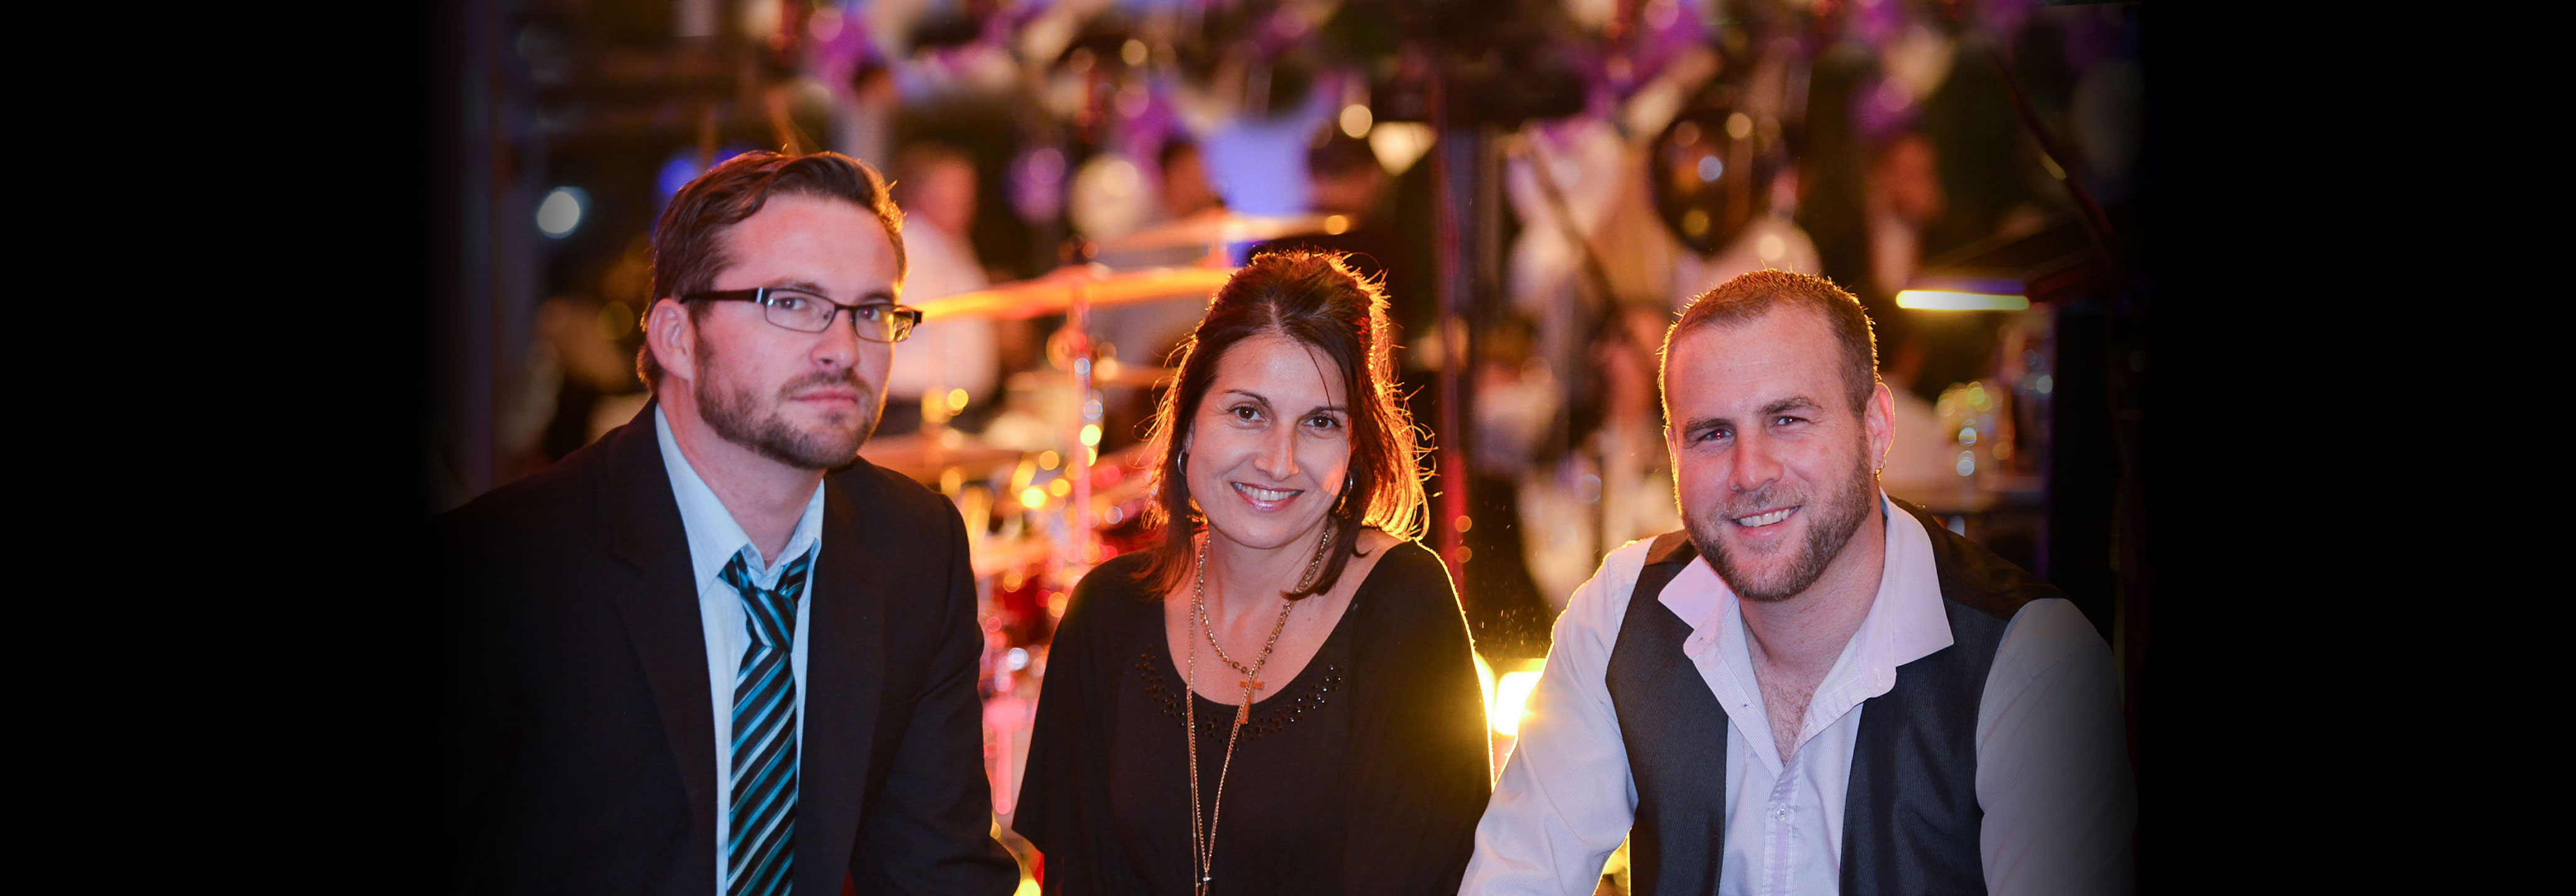 Chris, Jana & Pete at a corporate function